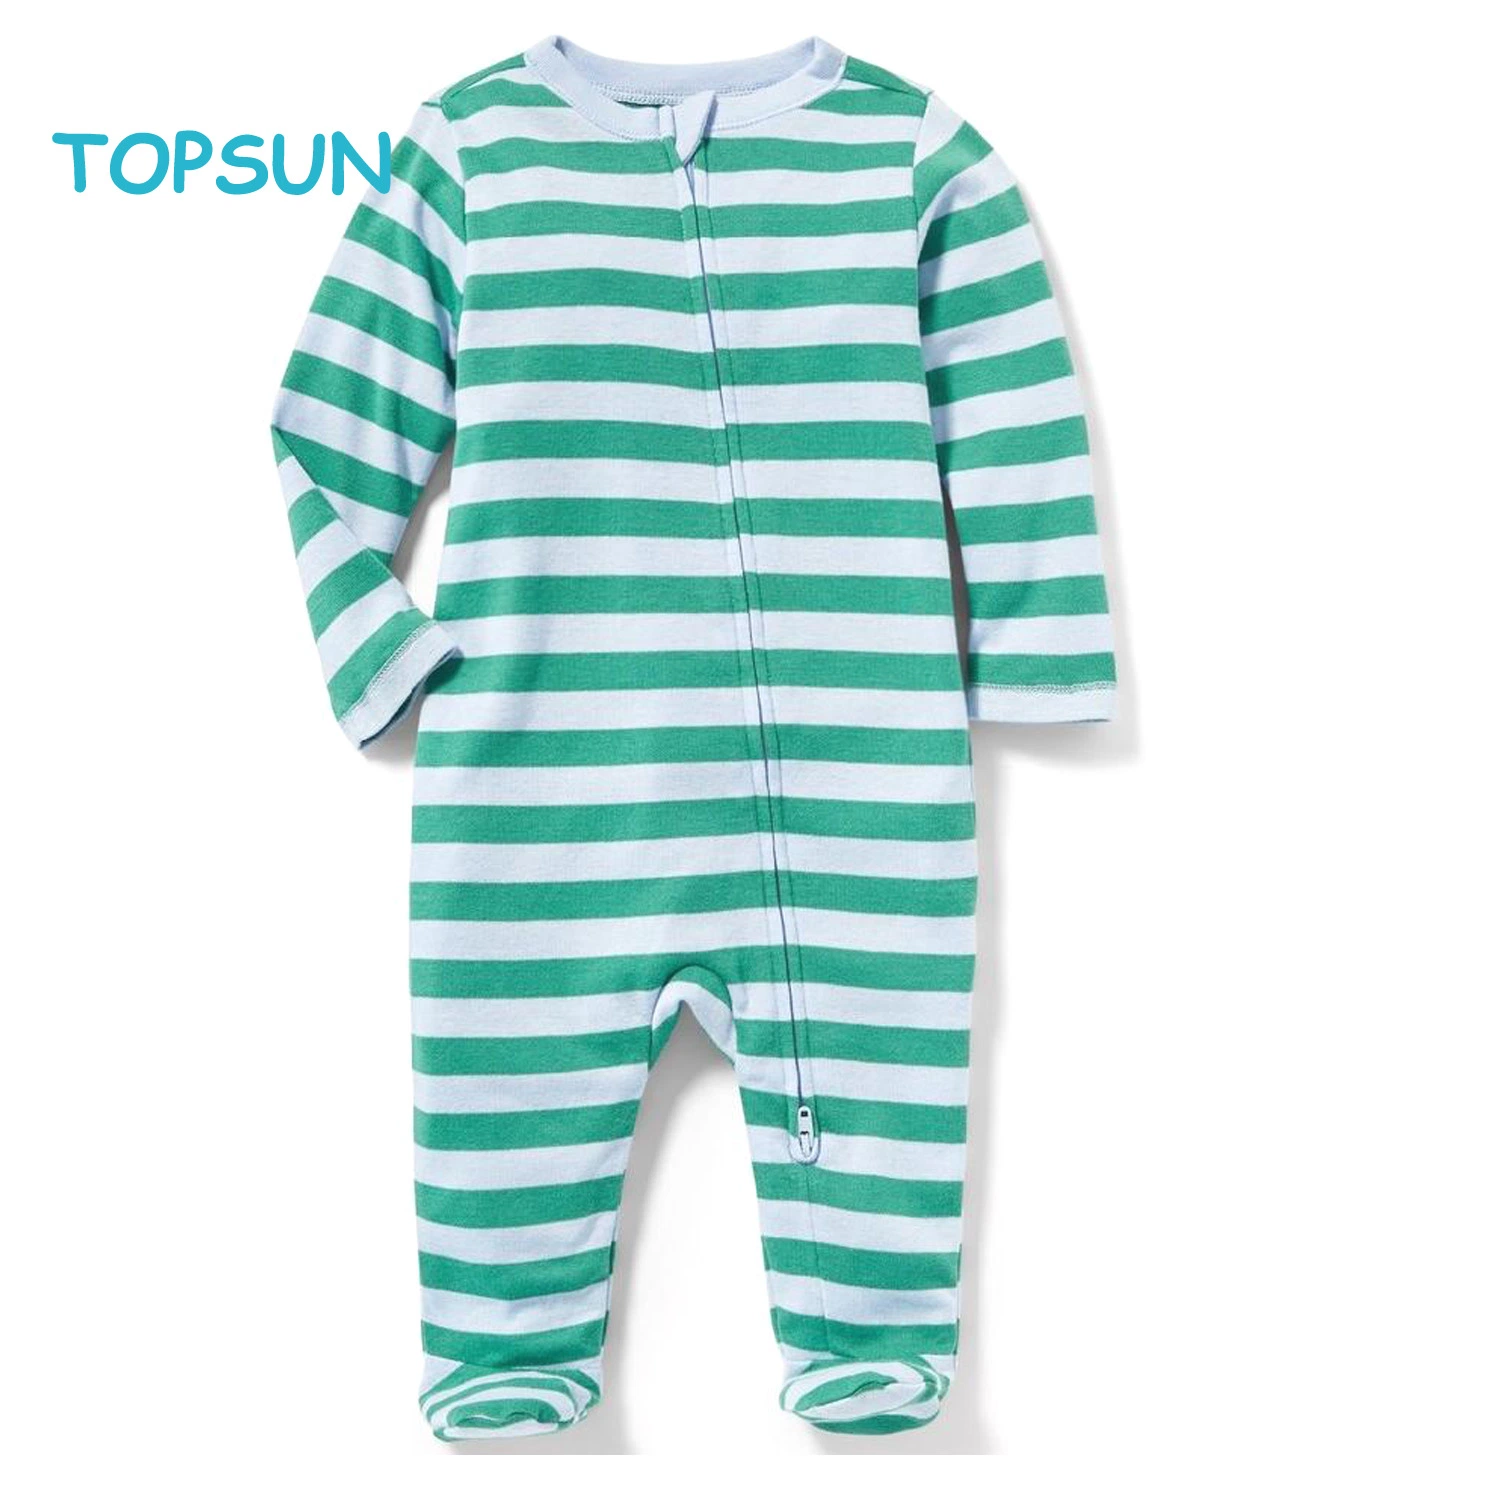 Baby Autumn Winter Thermal Clothes Crew Neck Babysuit High Quality Unisex Soft Baby Apparel